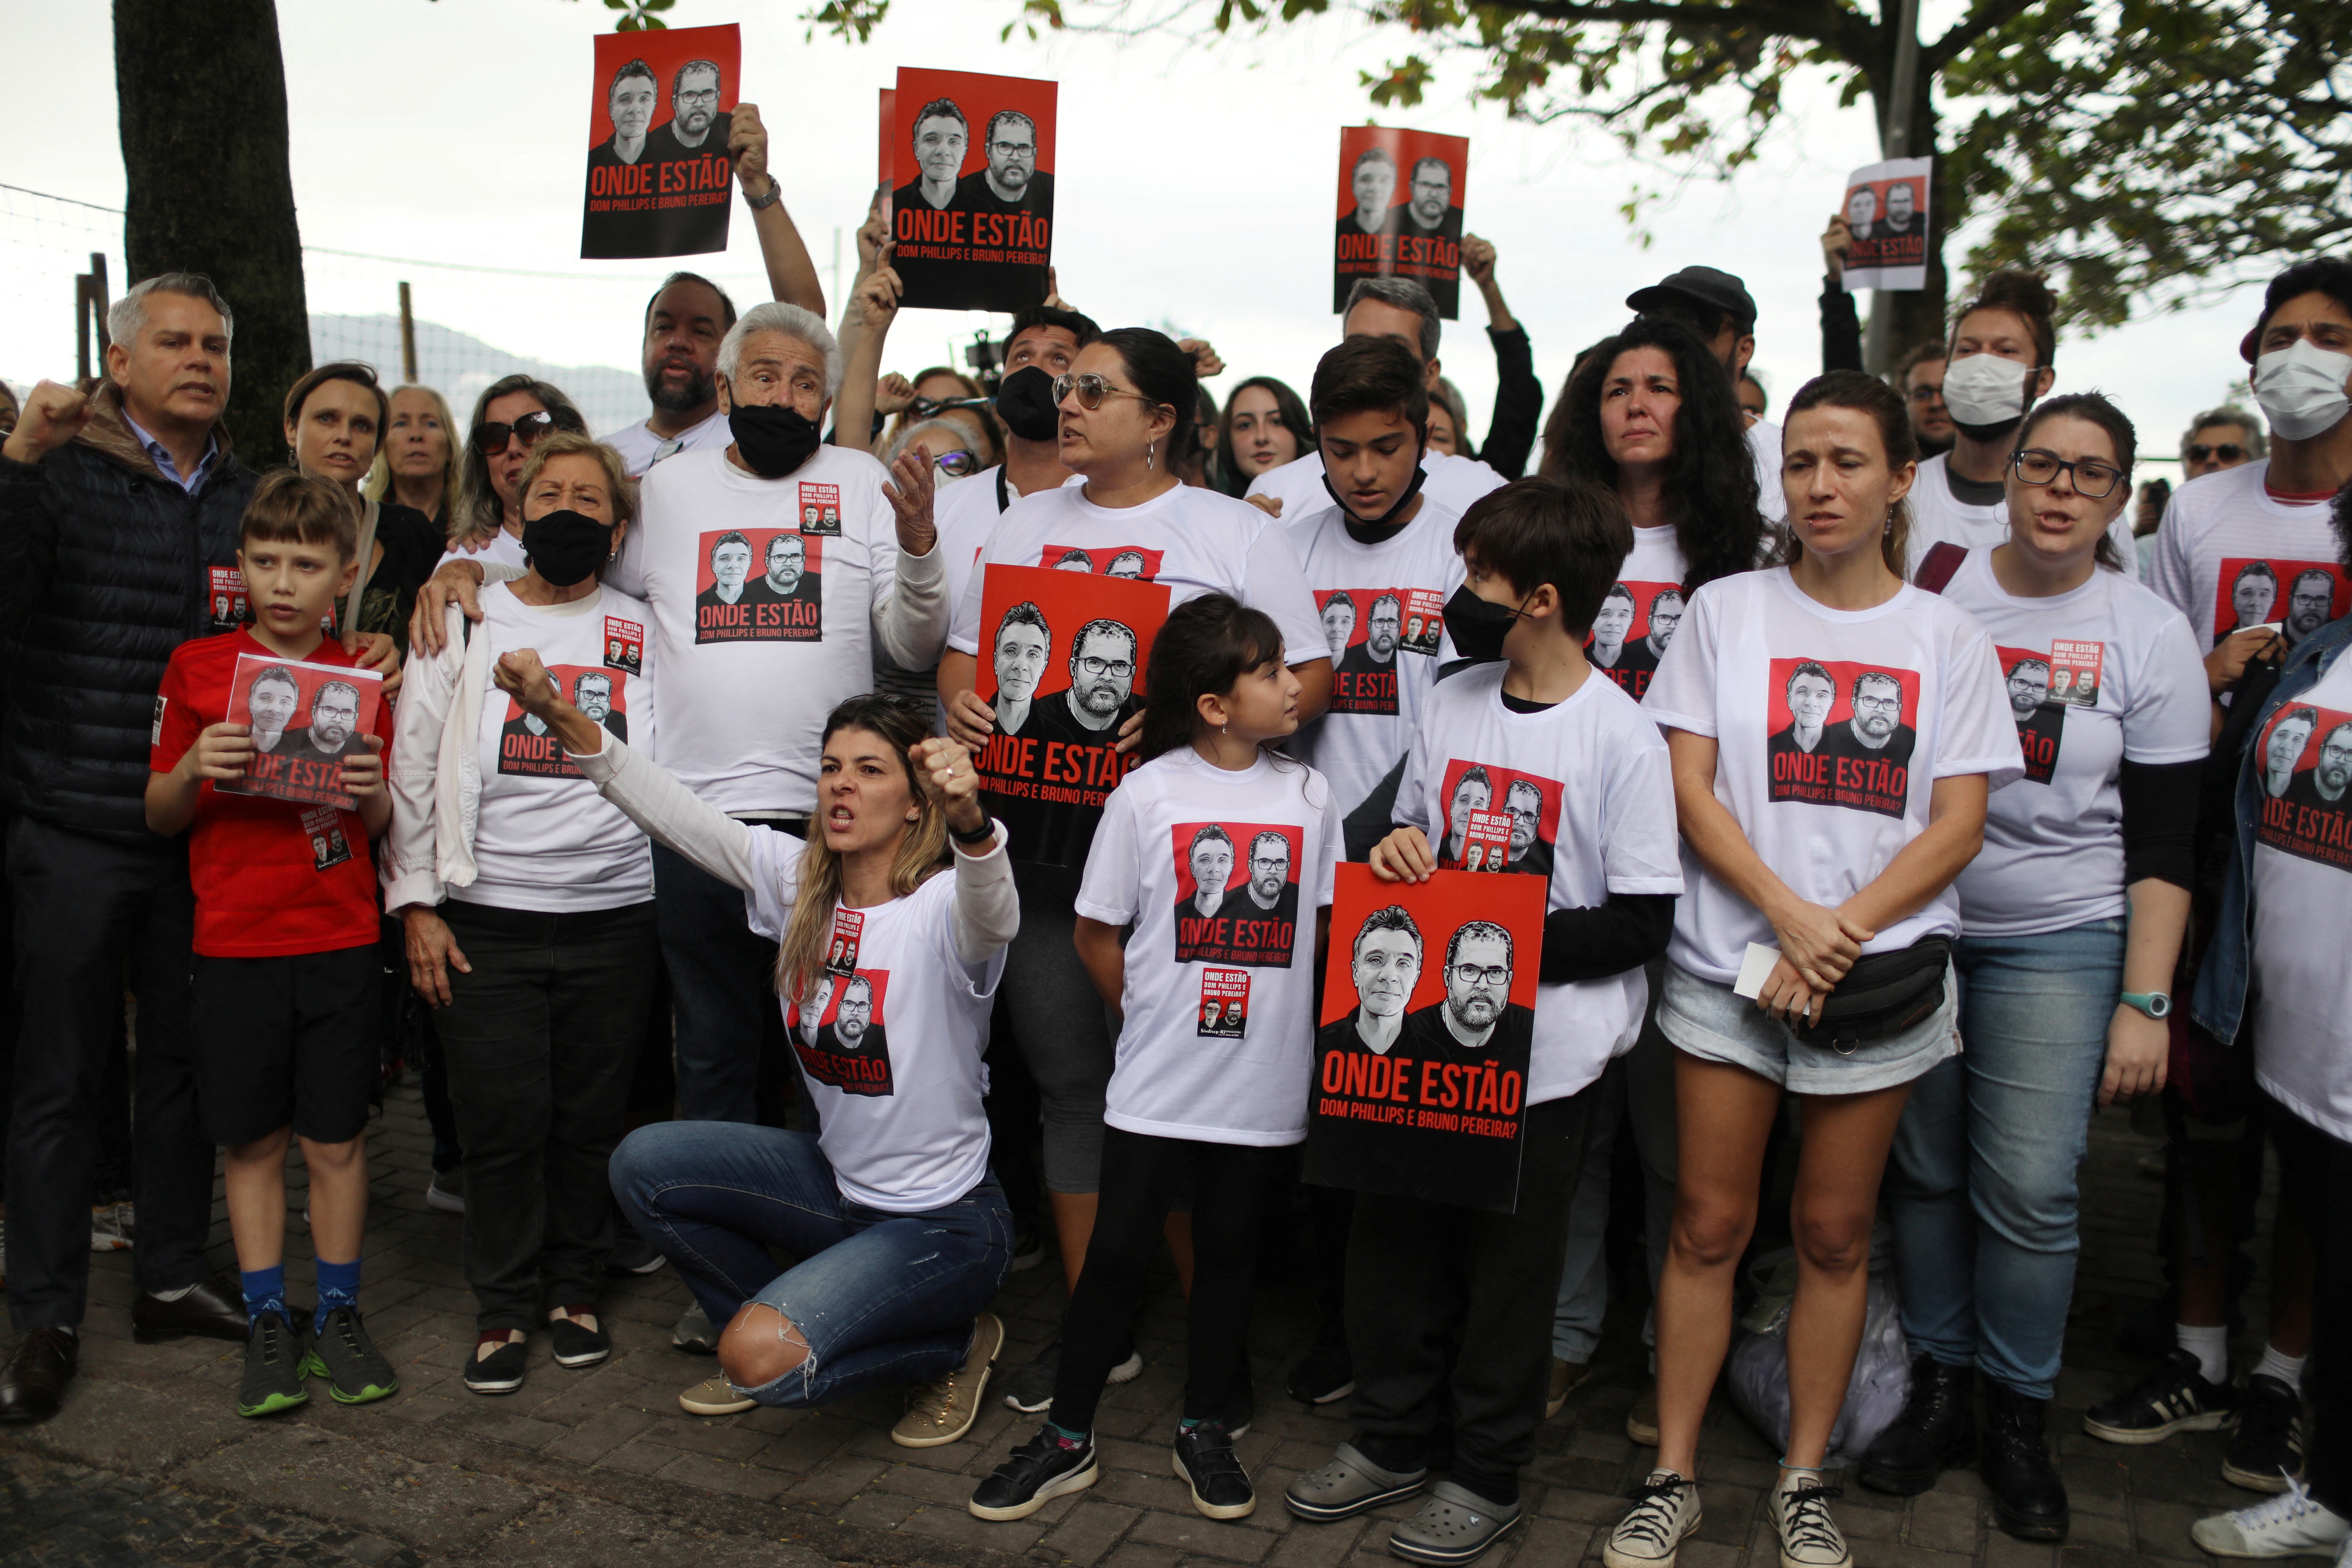 Families and friends of missing journalist and indigenous expert demand answers from Brazilian authorities in Rio de Janeiro